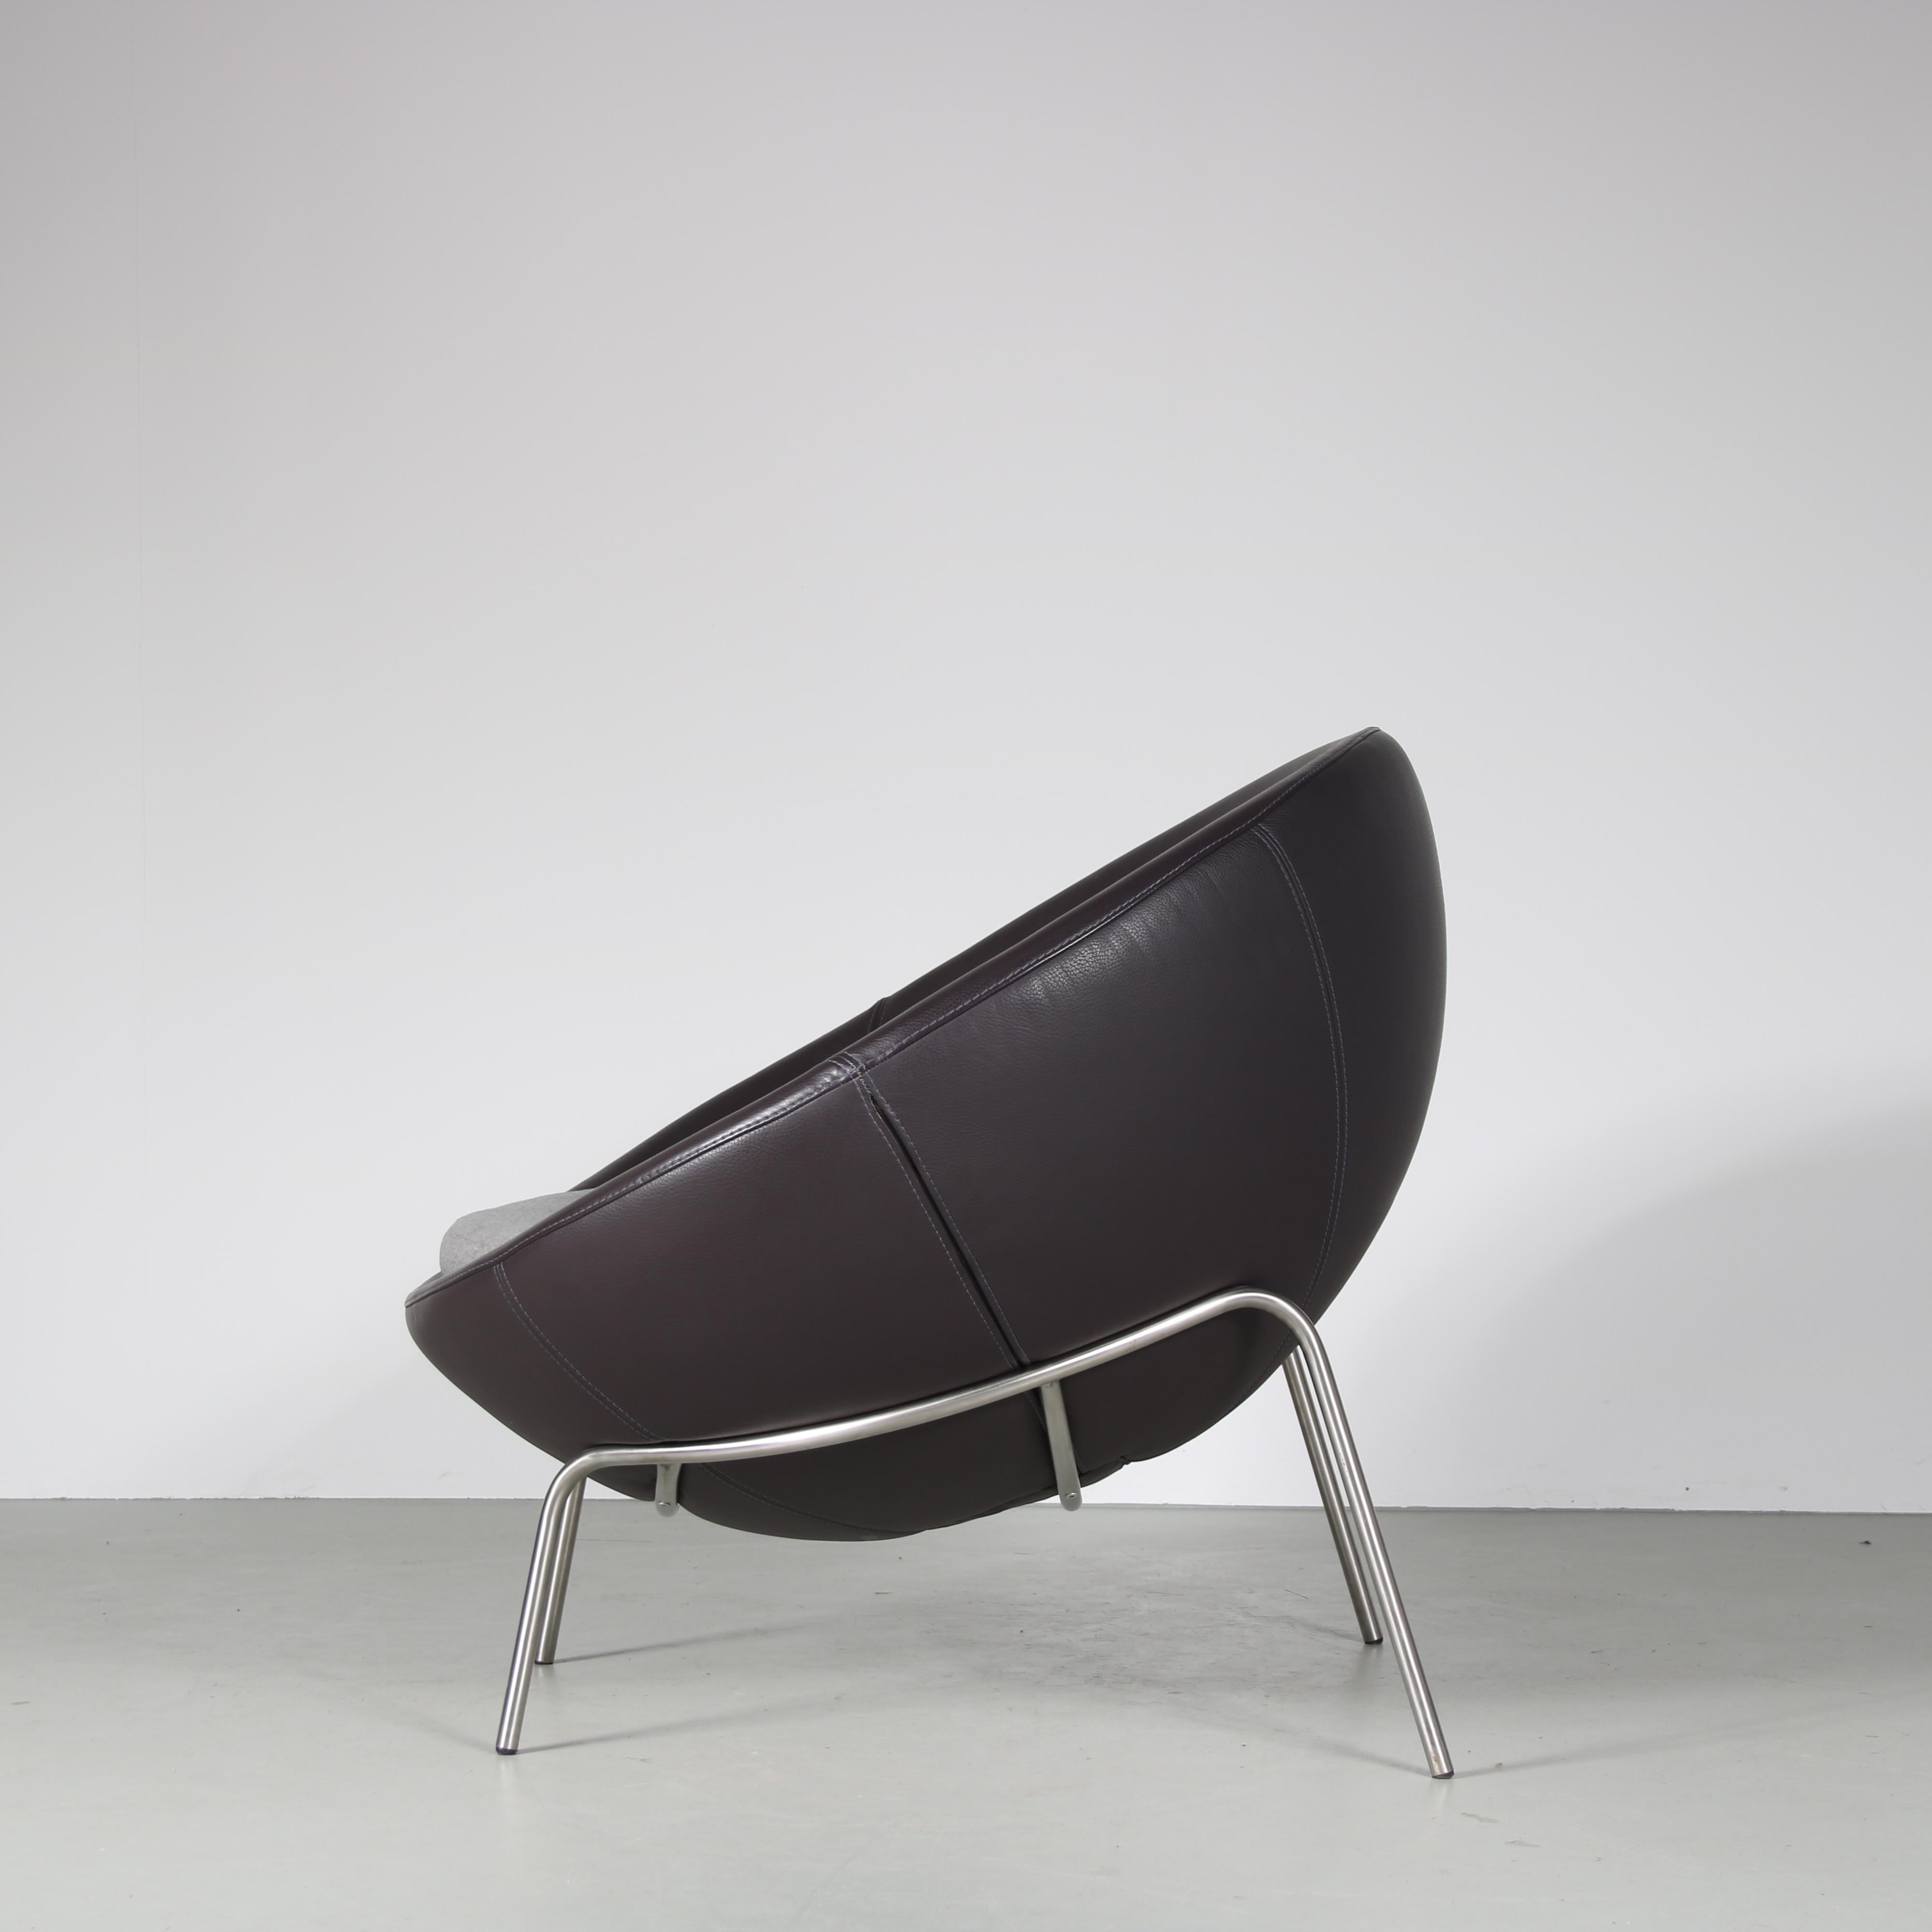 Contemporary 2000s Lounge chair by Bert Plantagie from the Netherlands